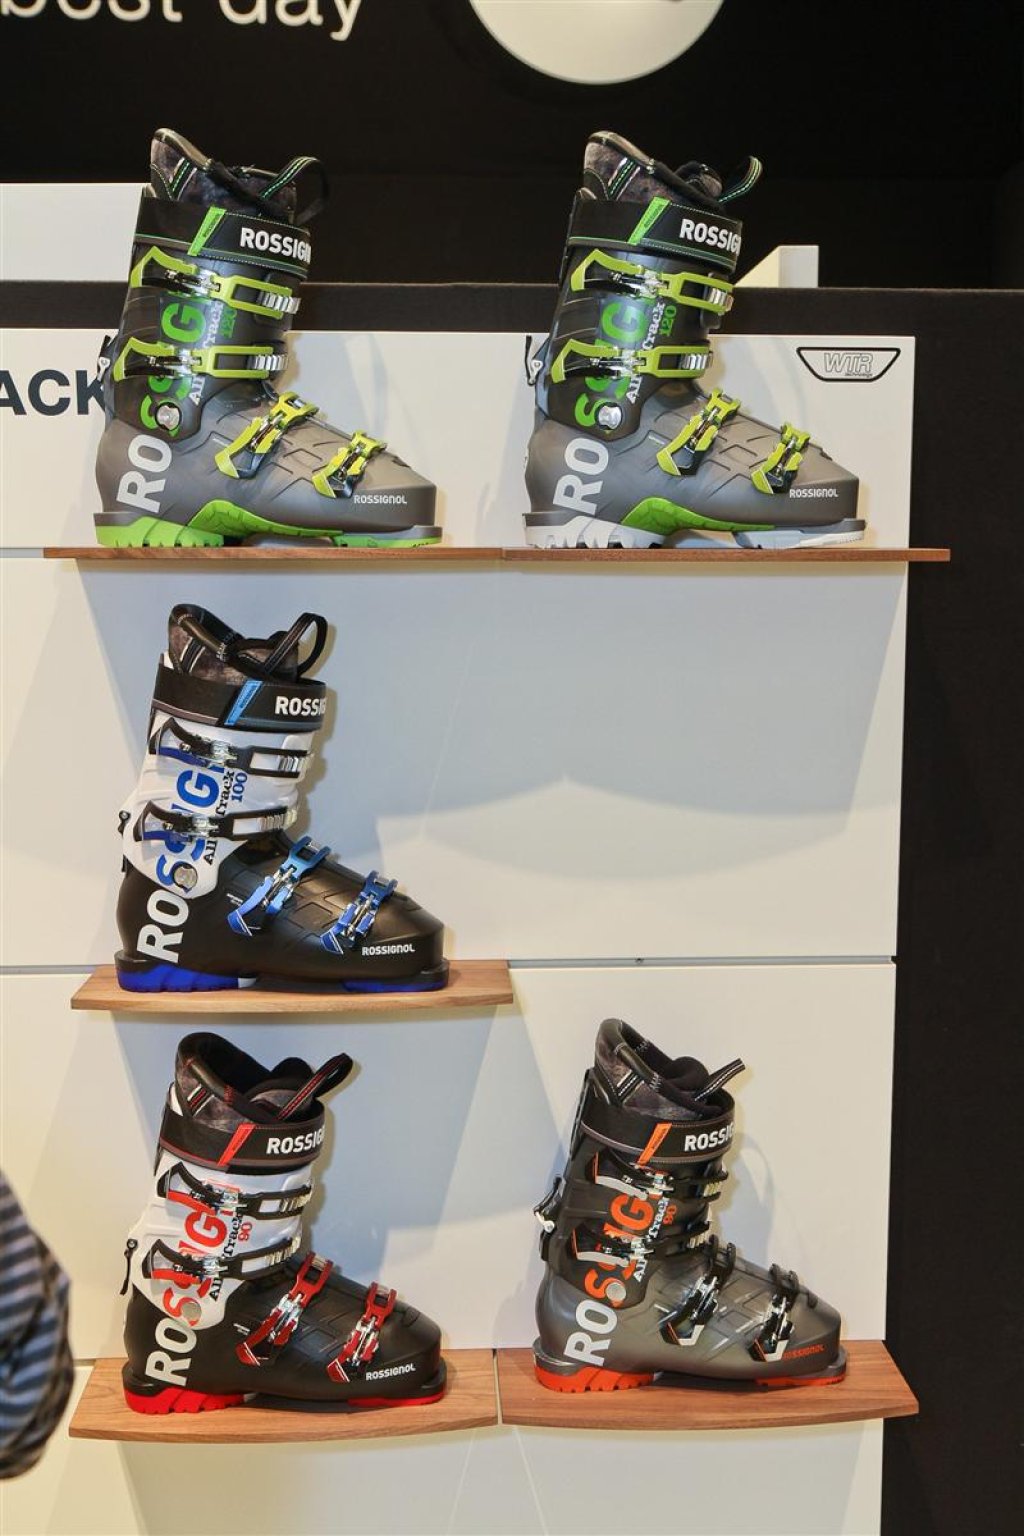 The other boots in the Rossignol Alltrack series: Alltrack 120, 100 and 90